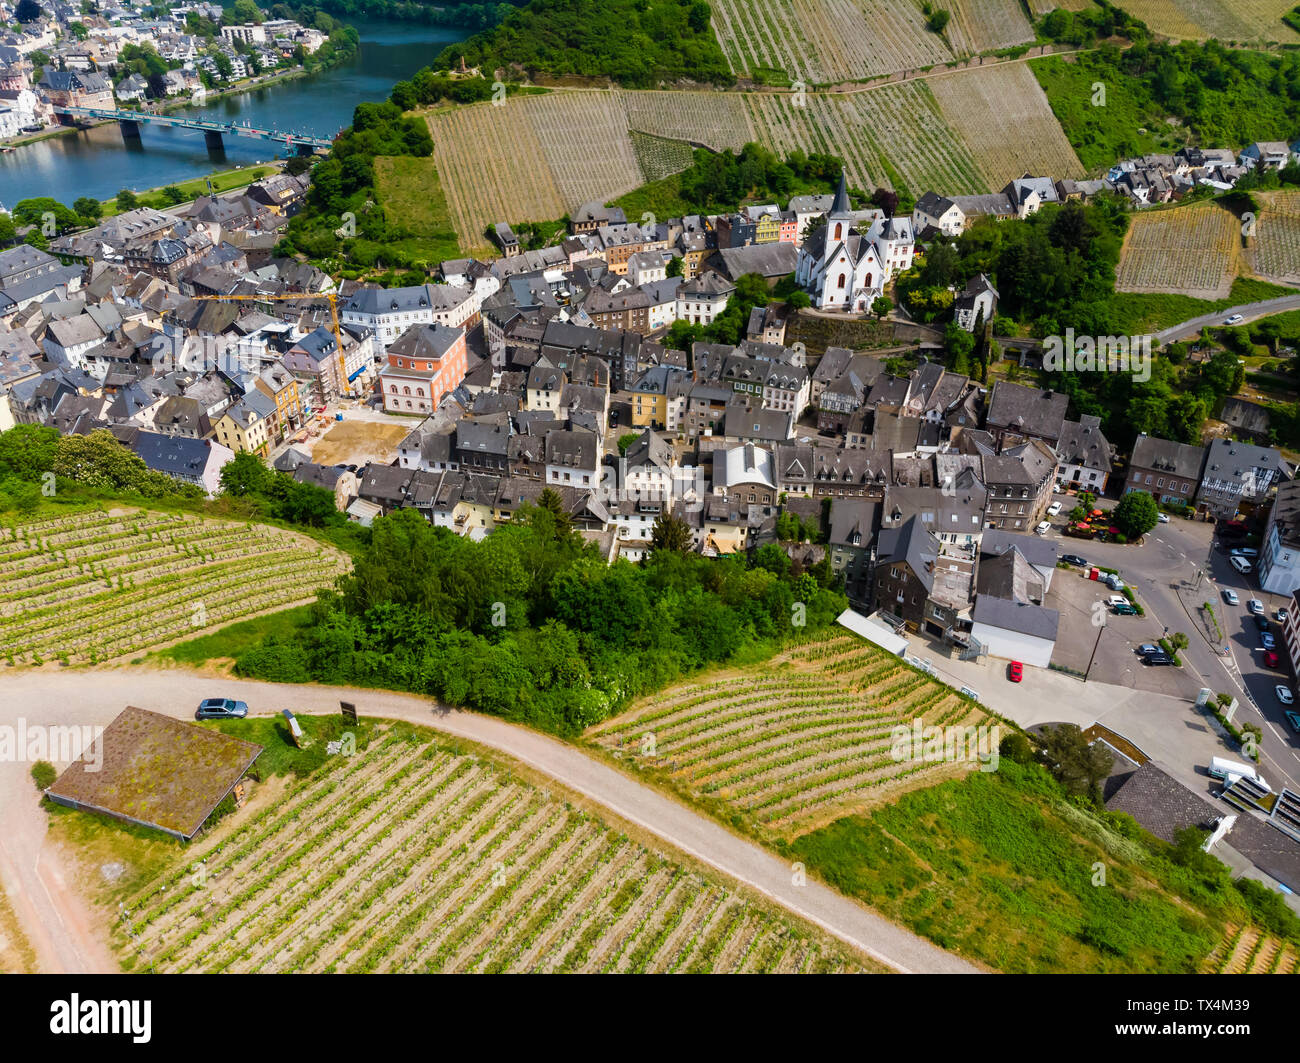 Germany, Rhineland-Palatinate, aerial view of Traben-Trarbach with Moselle river, vine yards Stock Photo